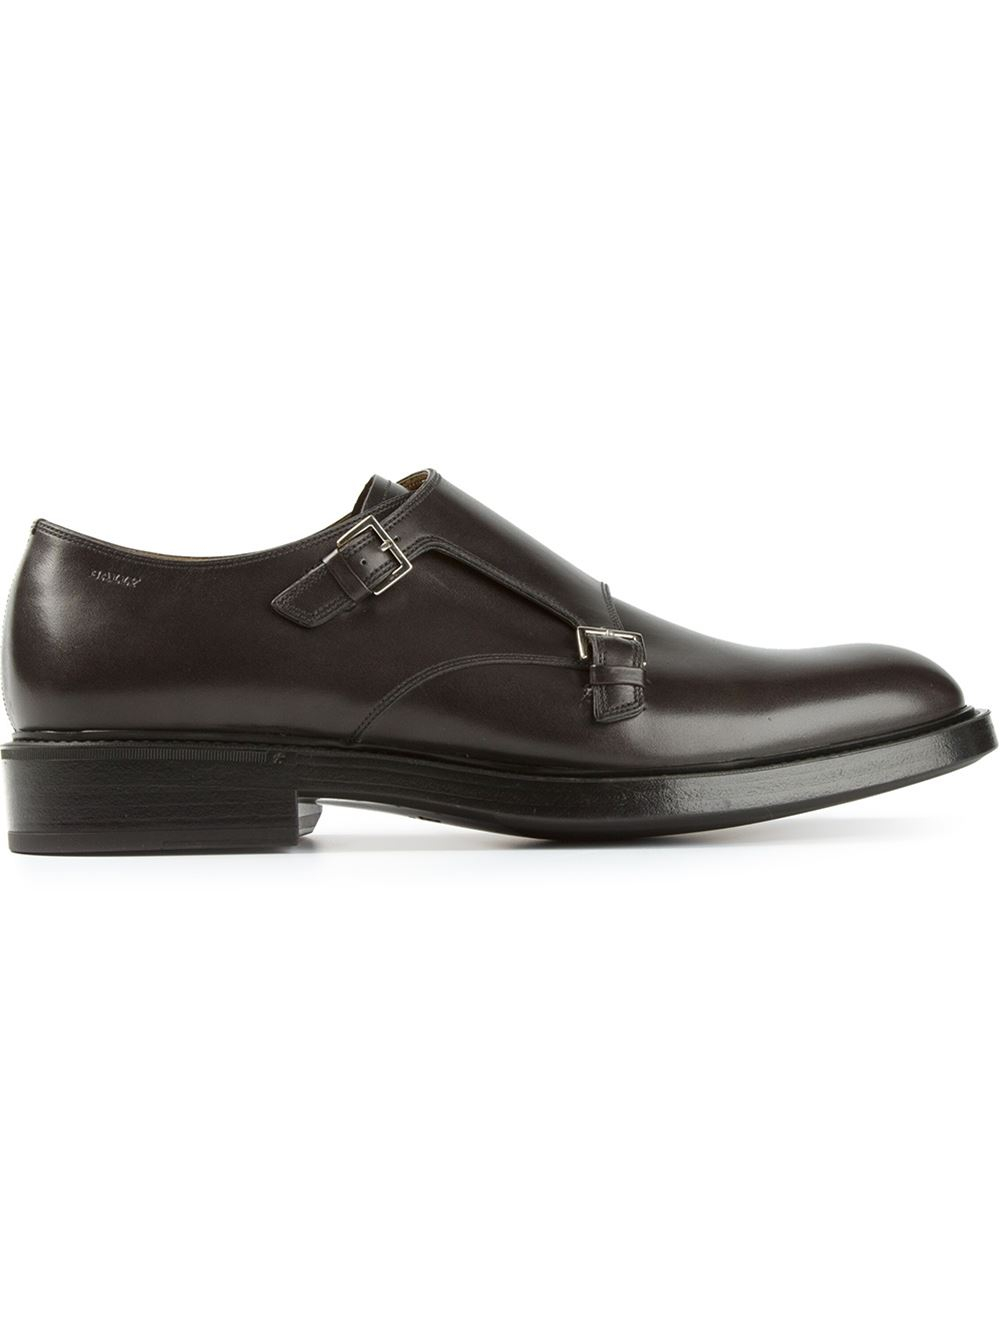 Bally Classic Monk Shoes in Black for Men - Lyst